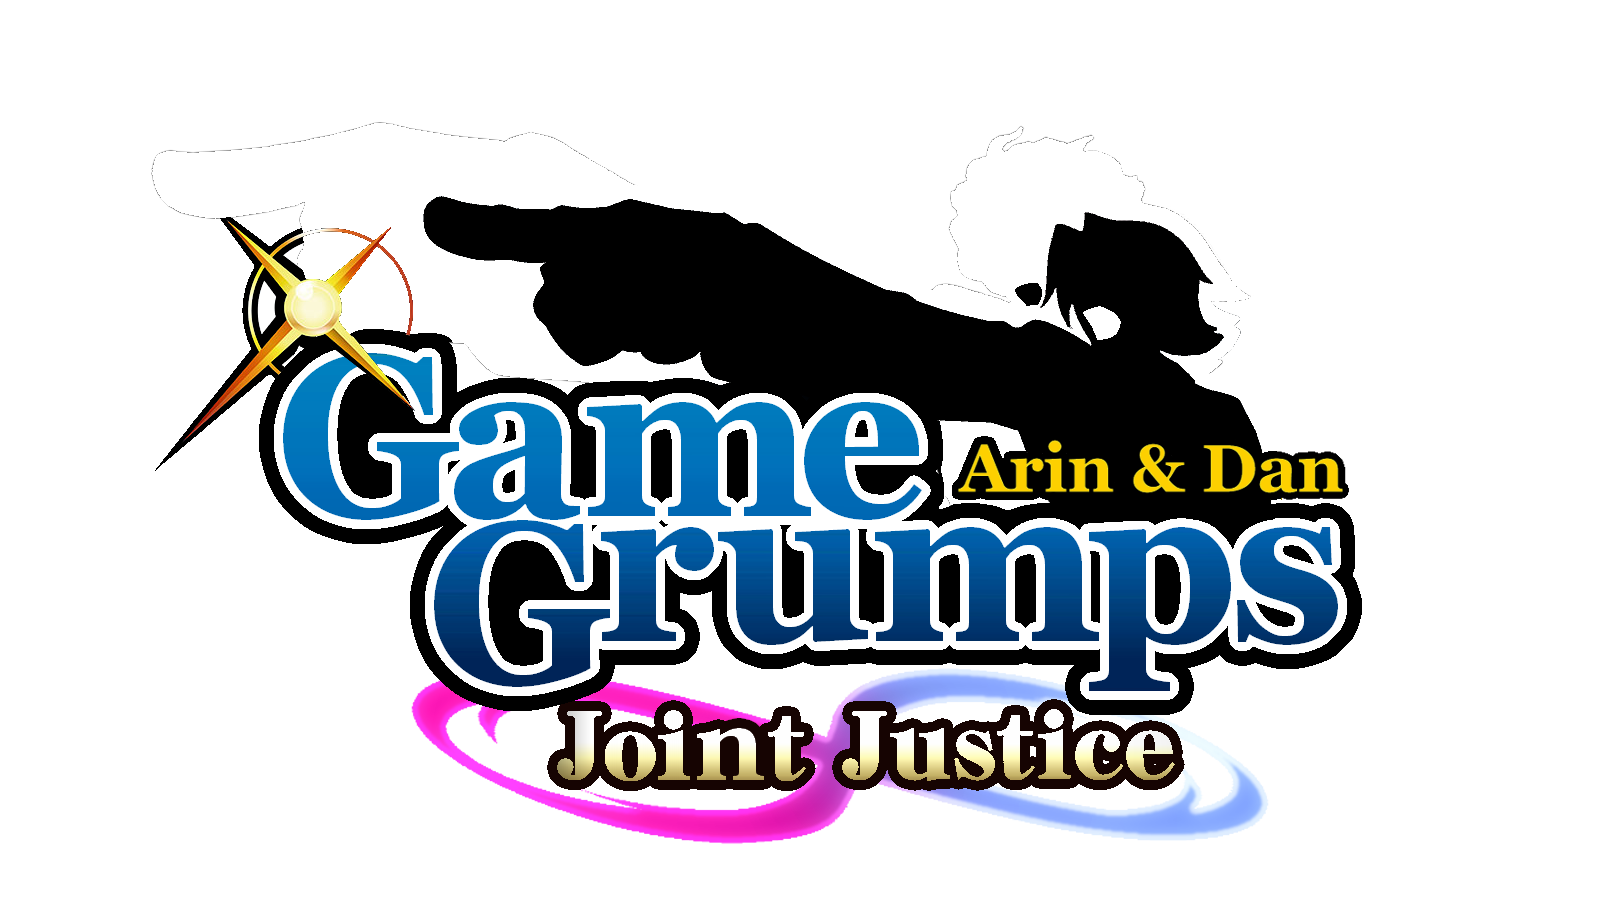 Game Grumps: Joint Justice (Demo) by Studio Lovelies